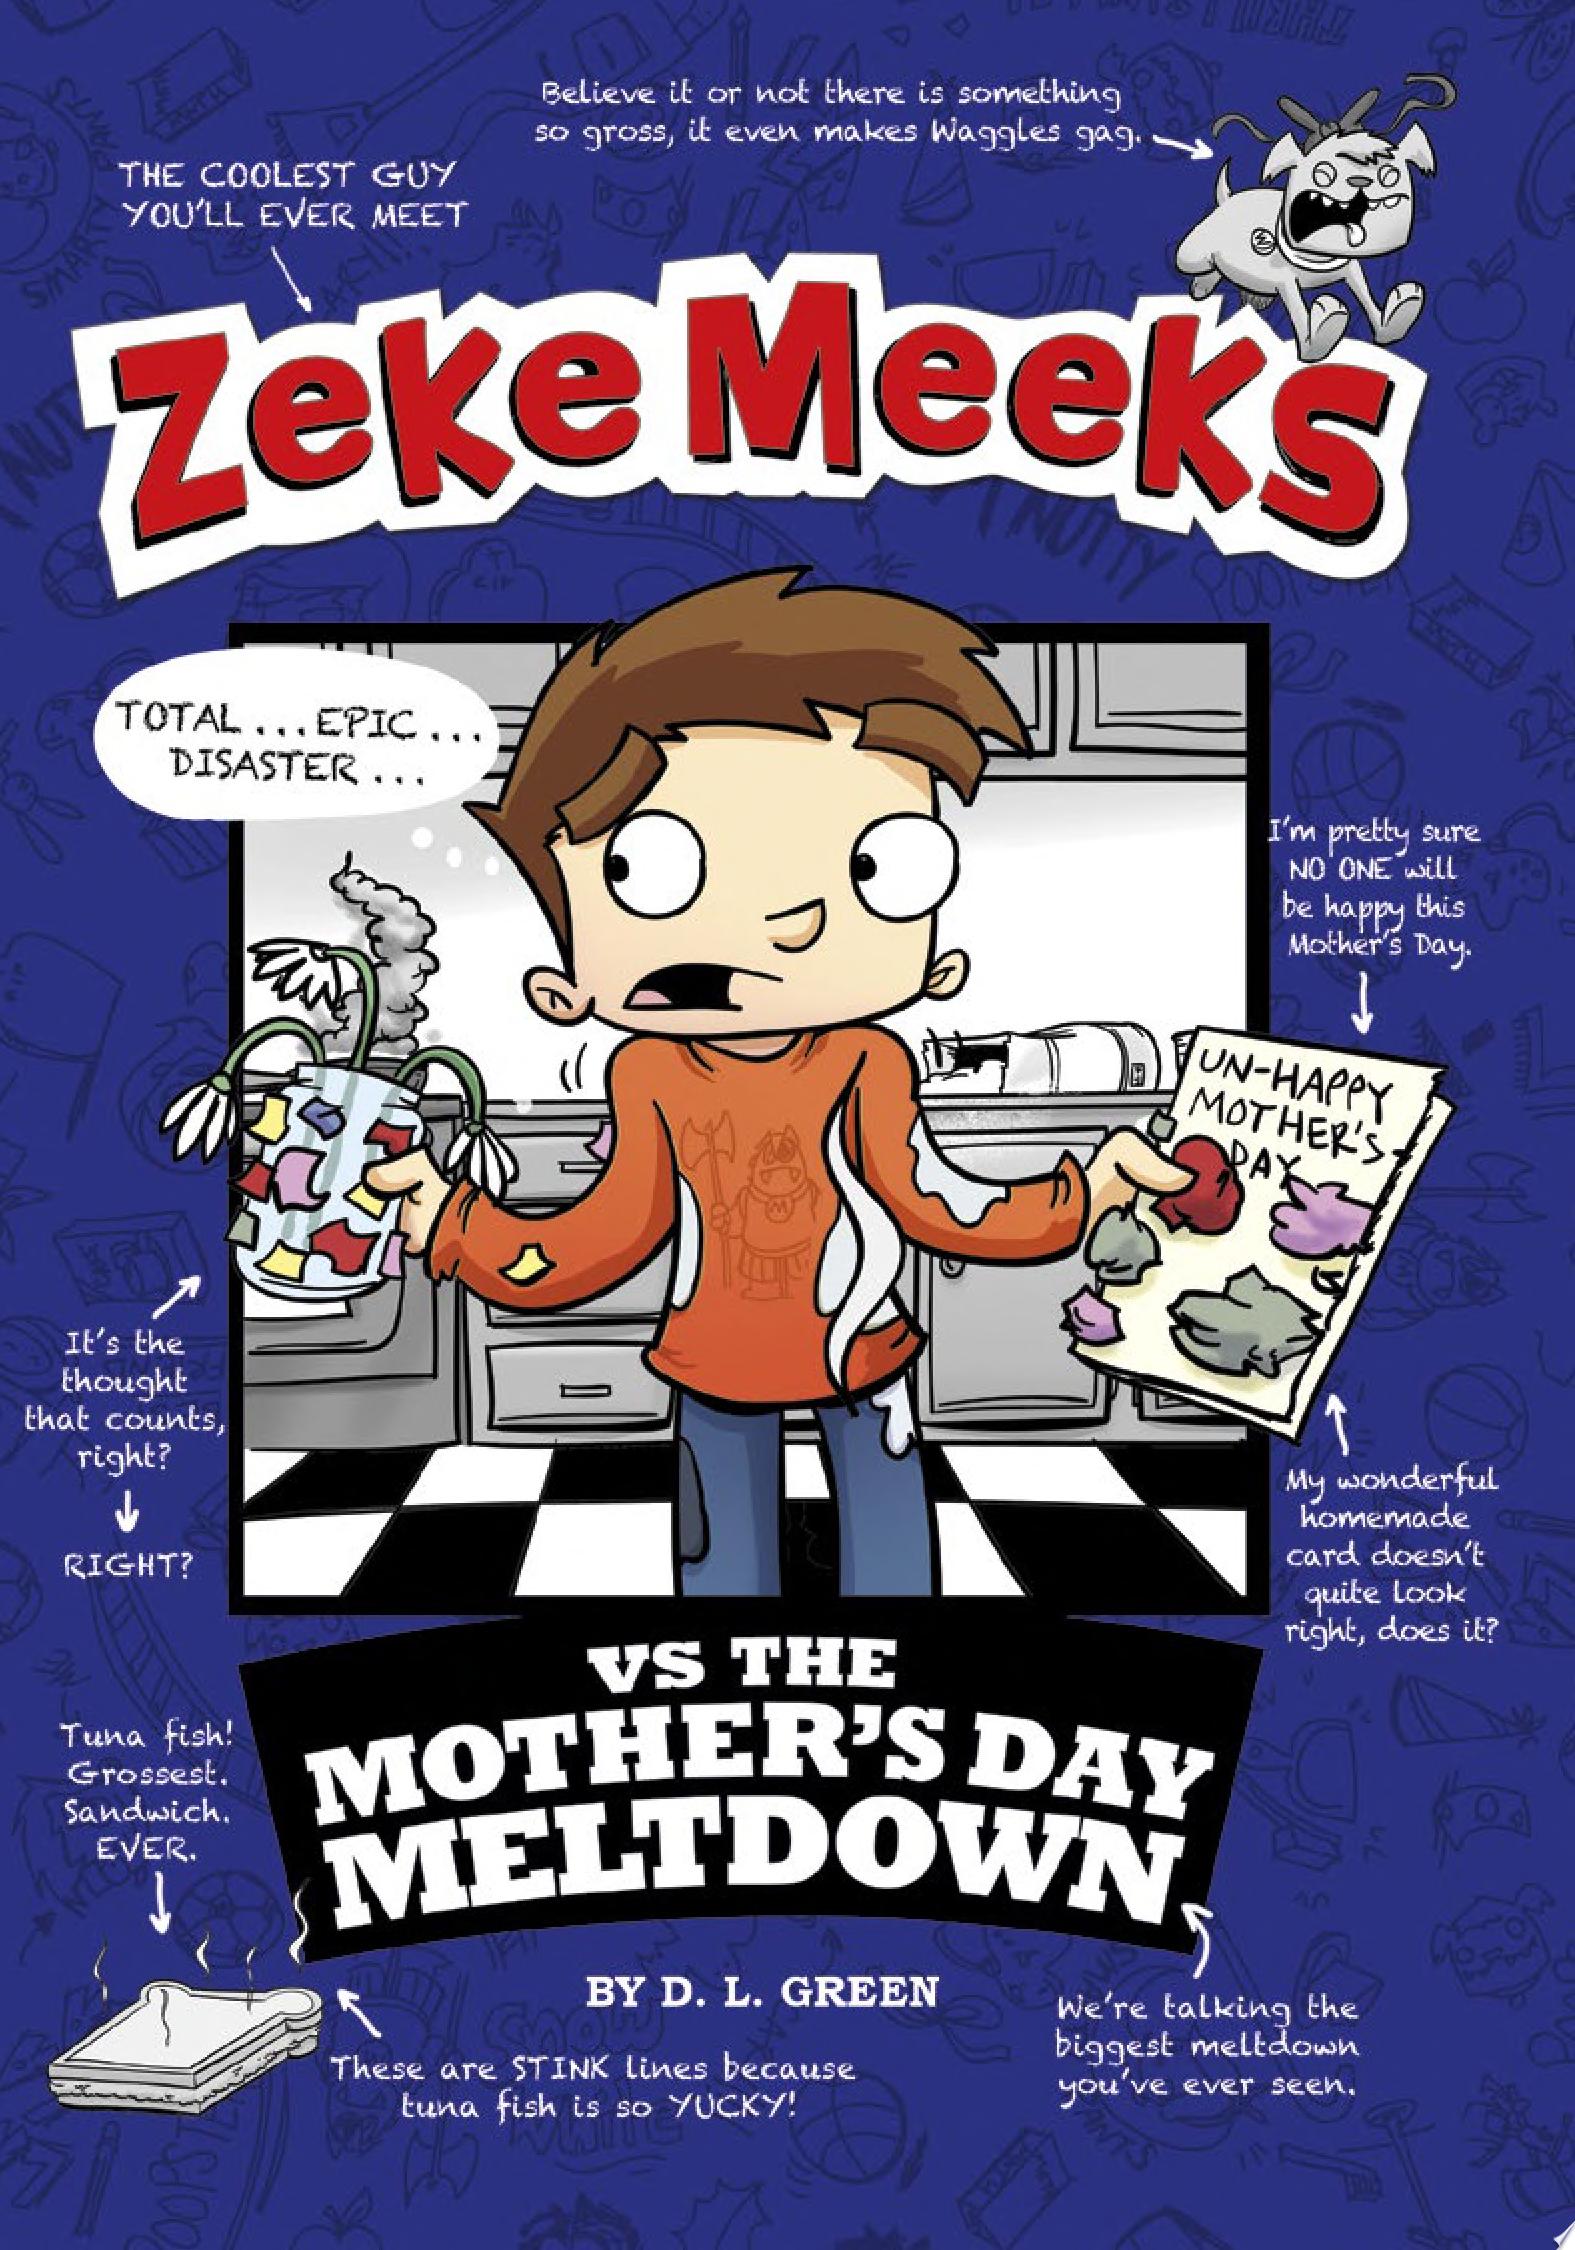 Image for "Zeke Meeks Vs the Mother's Day Meltdown"